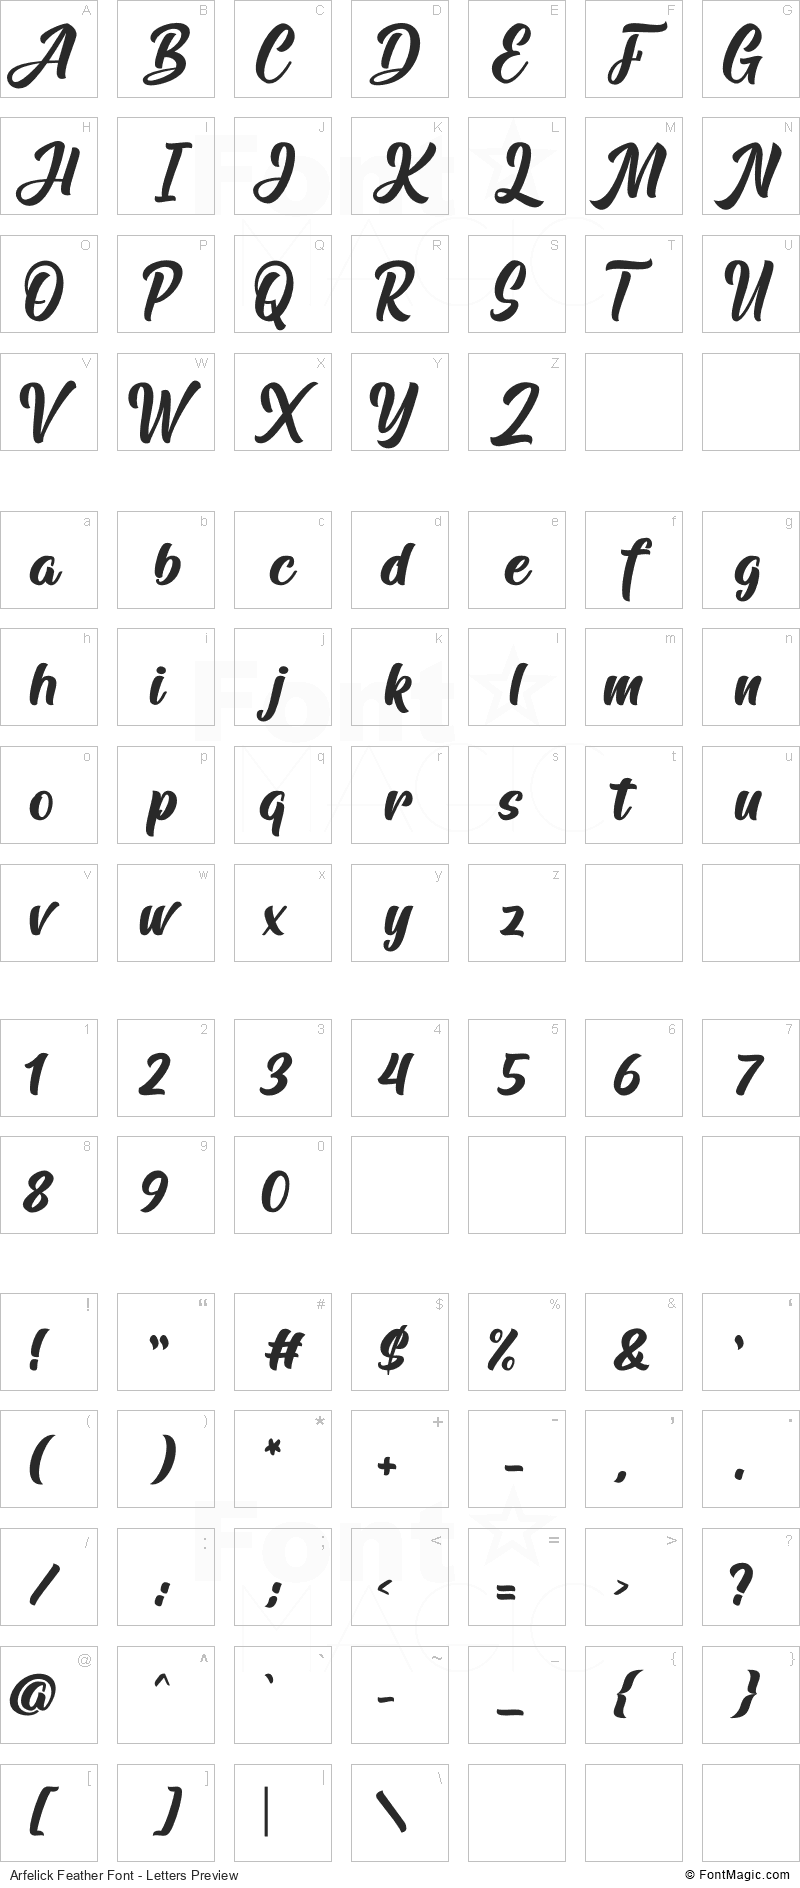 Arfelick Feather Font - All Latters Preview Chart